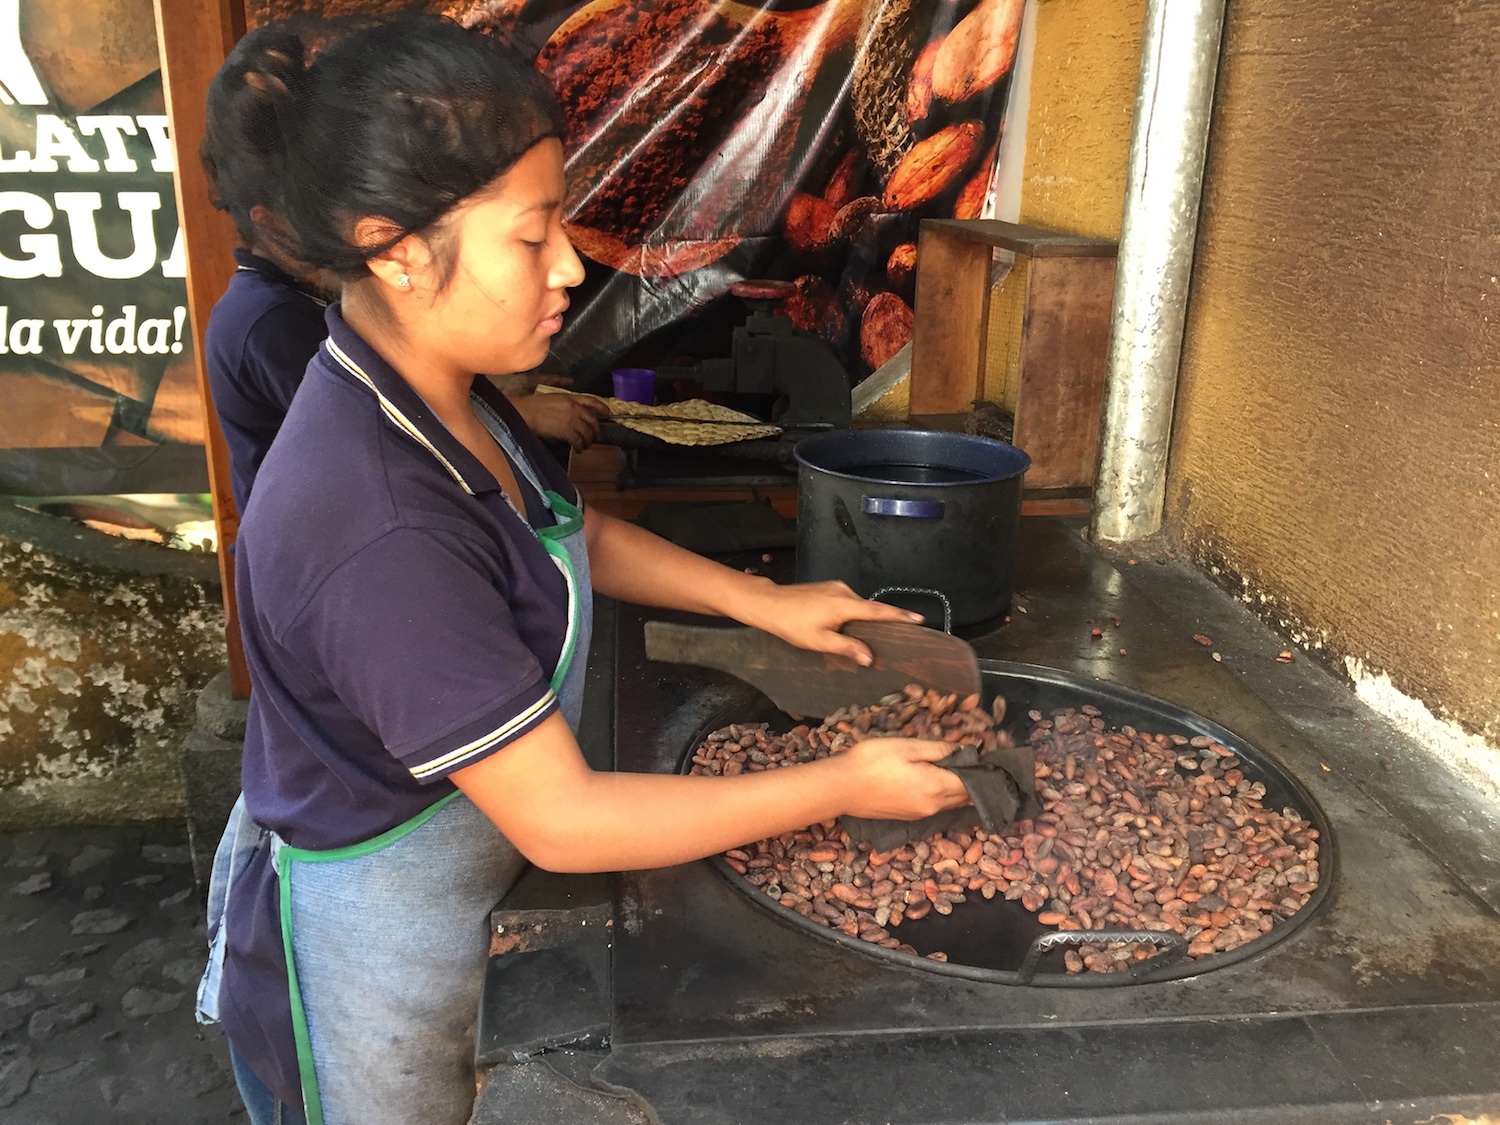 Mayan woman roasting cacao beans over wood-fi red grill, creating an enticing aroma.